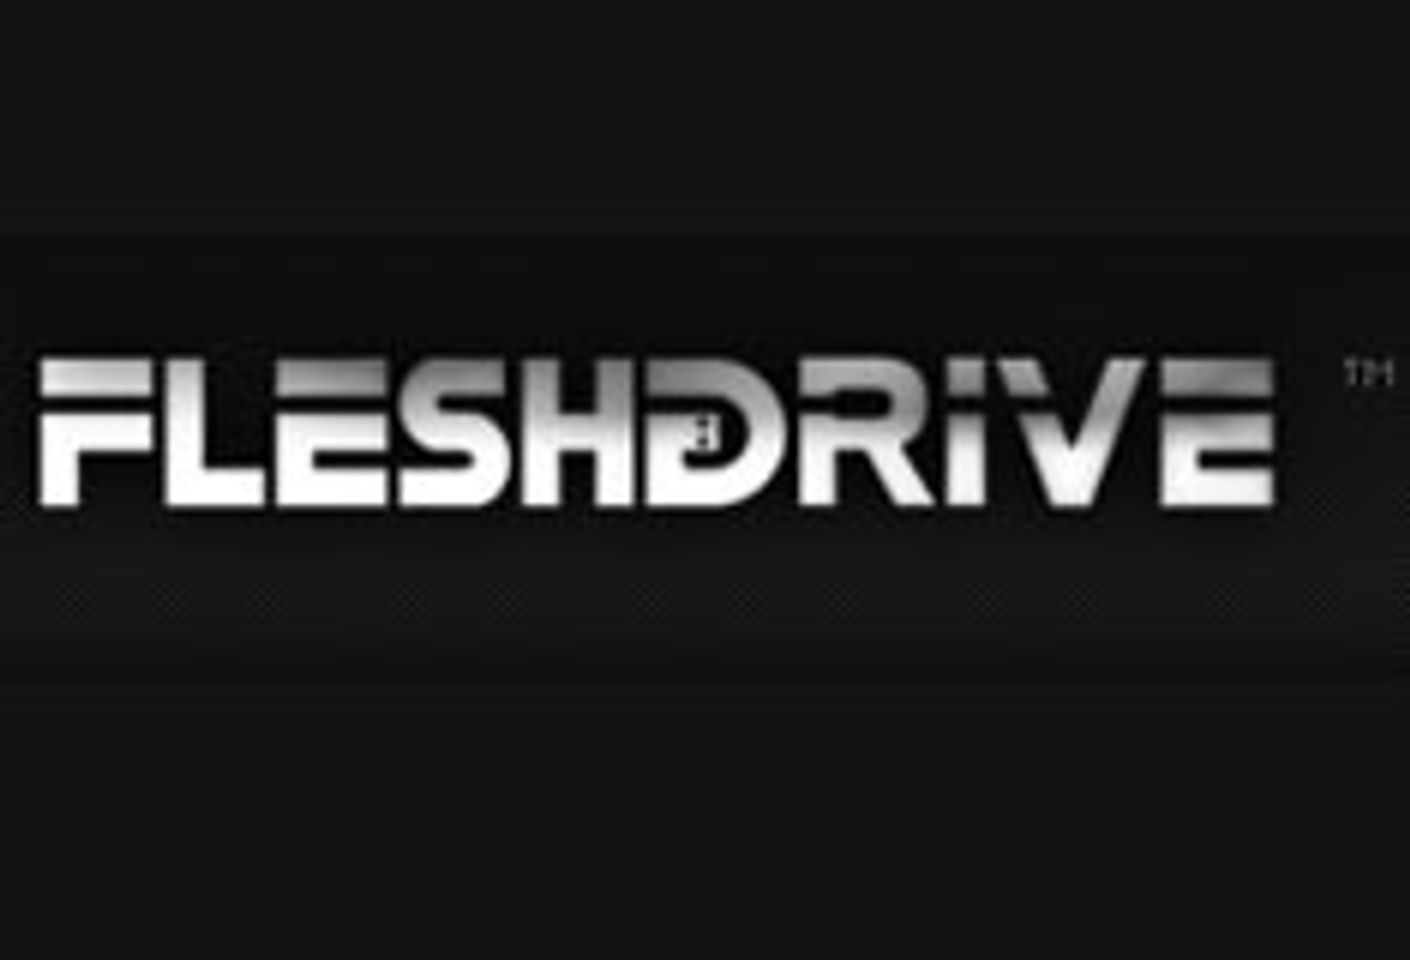 FleshDrive Releases New Mary Carey Drive from Legend